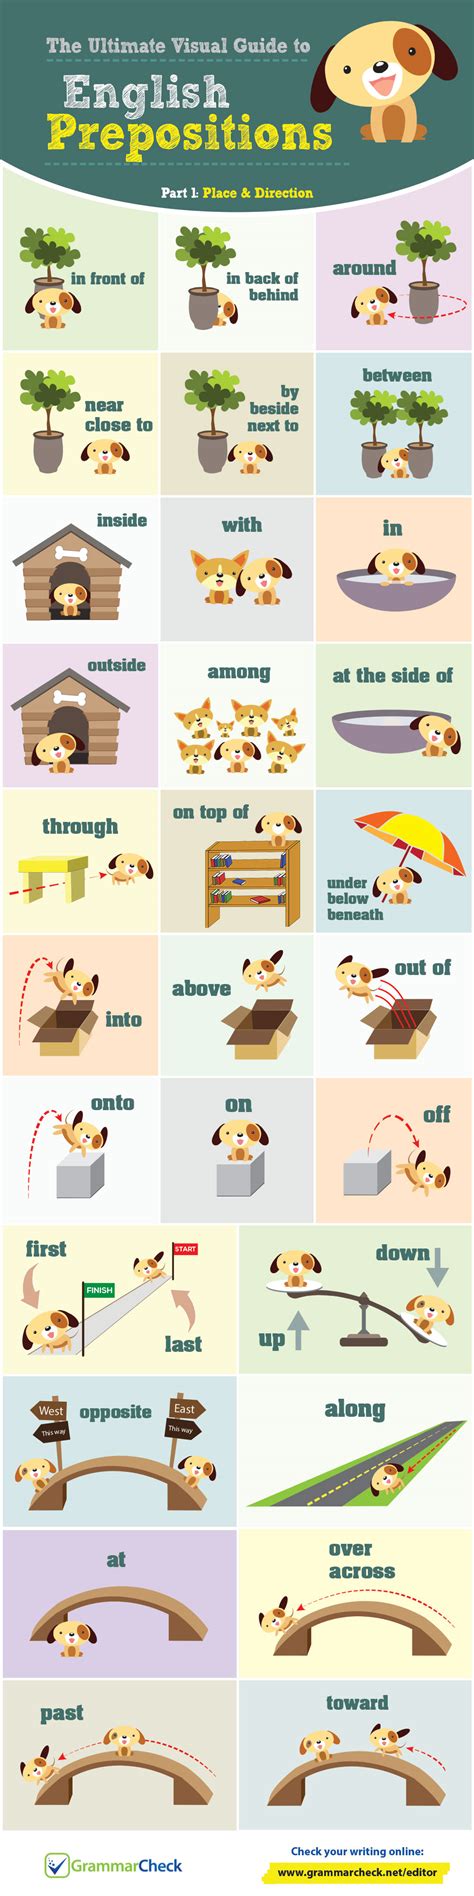 The Visual Guide To English Prepositions Part 12 Infographic